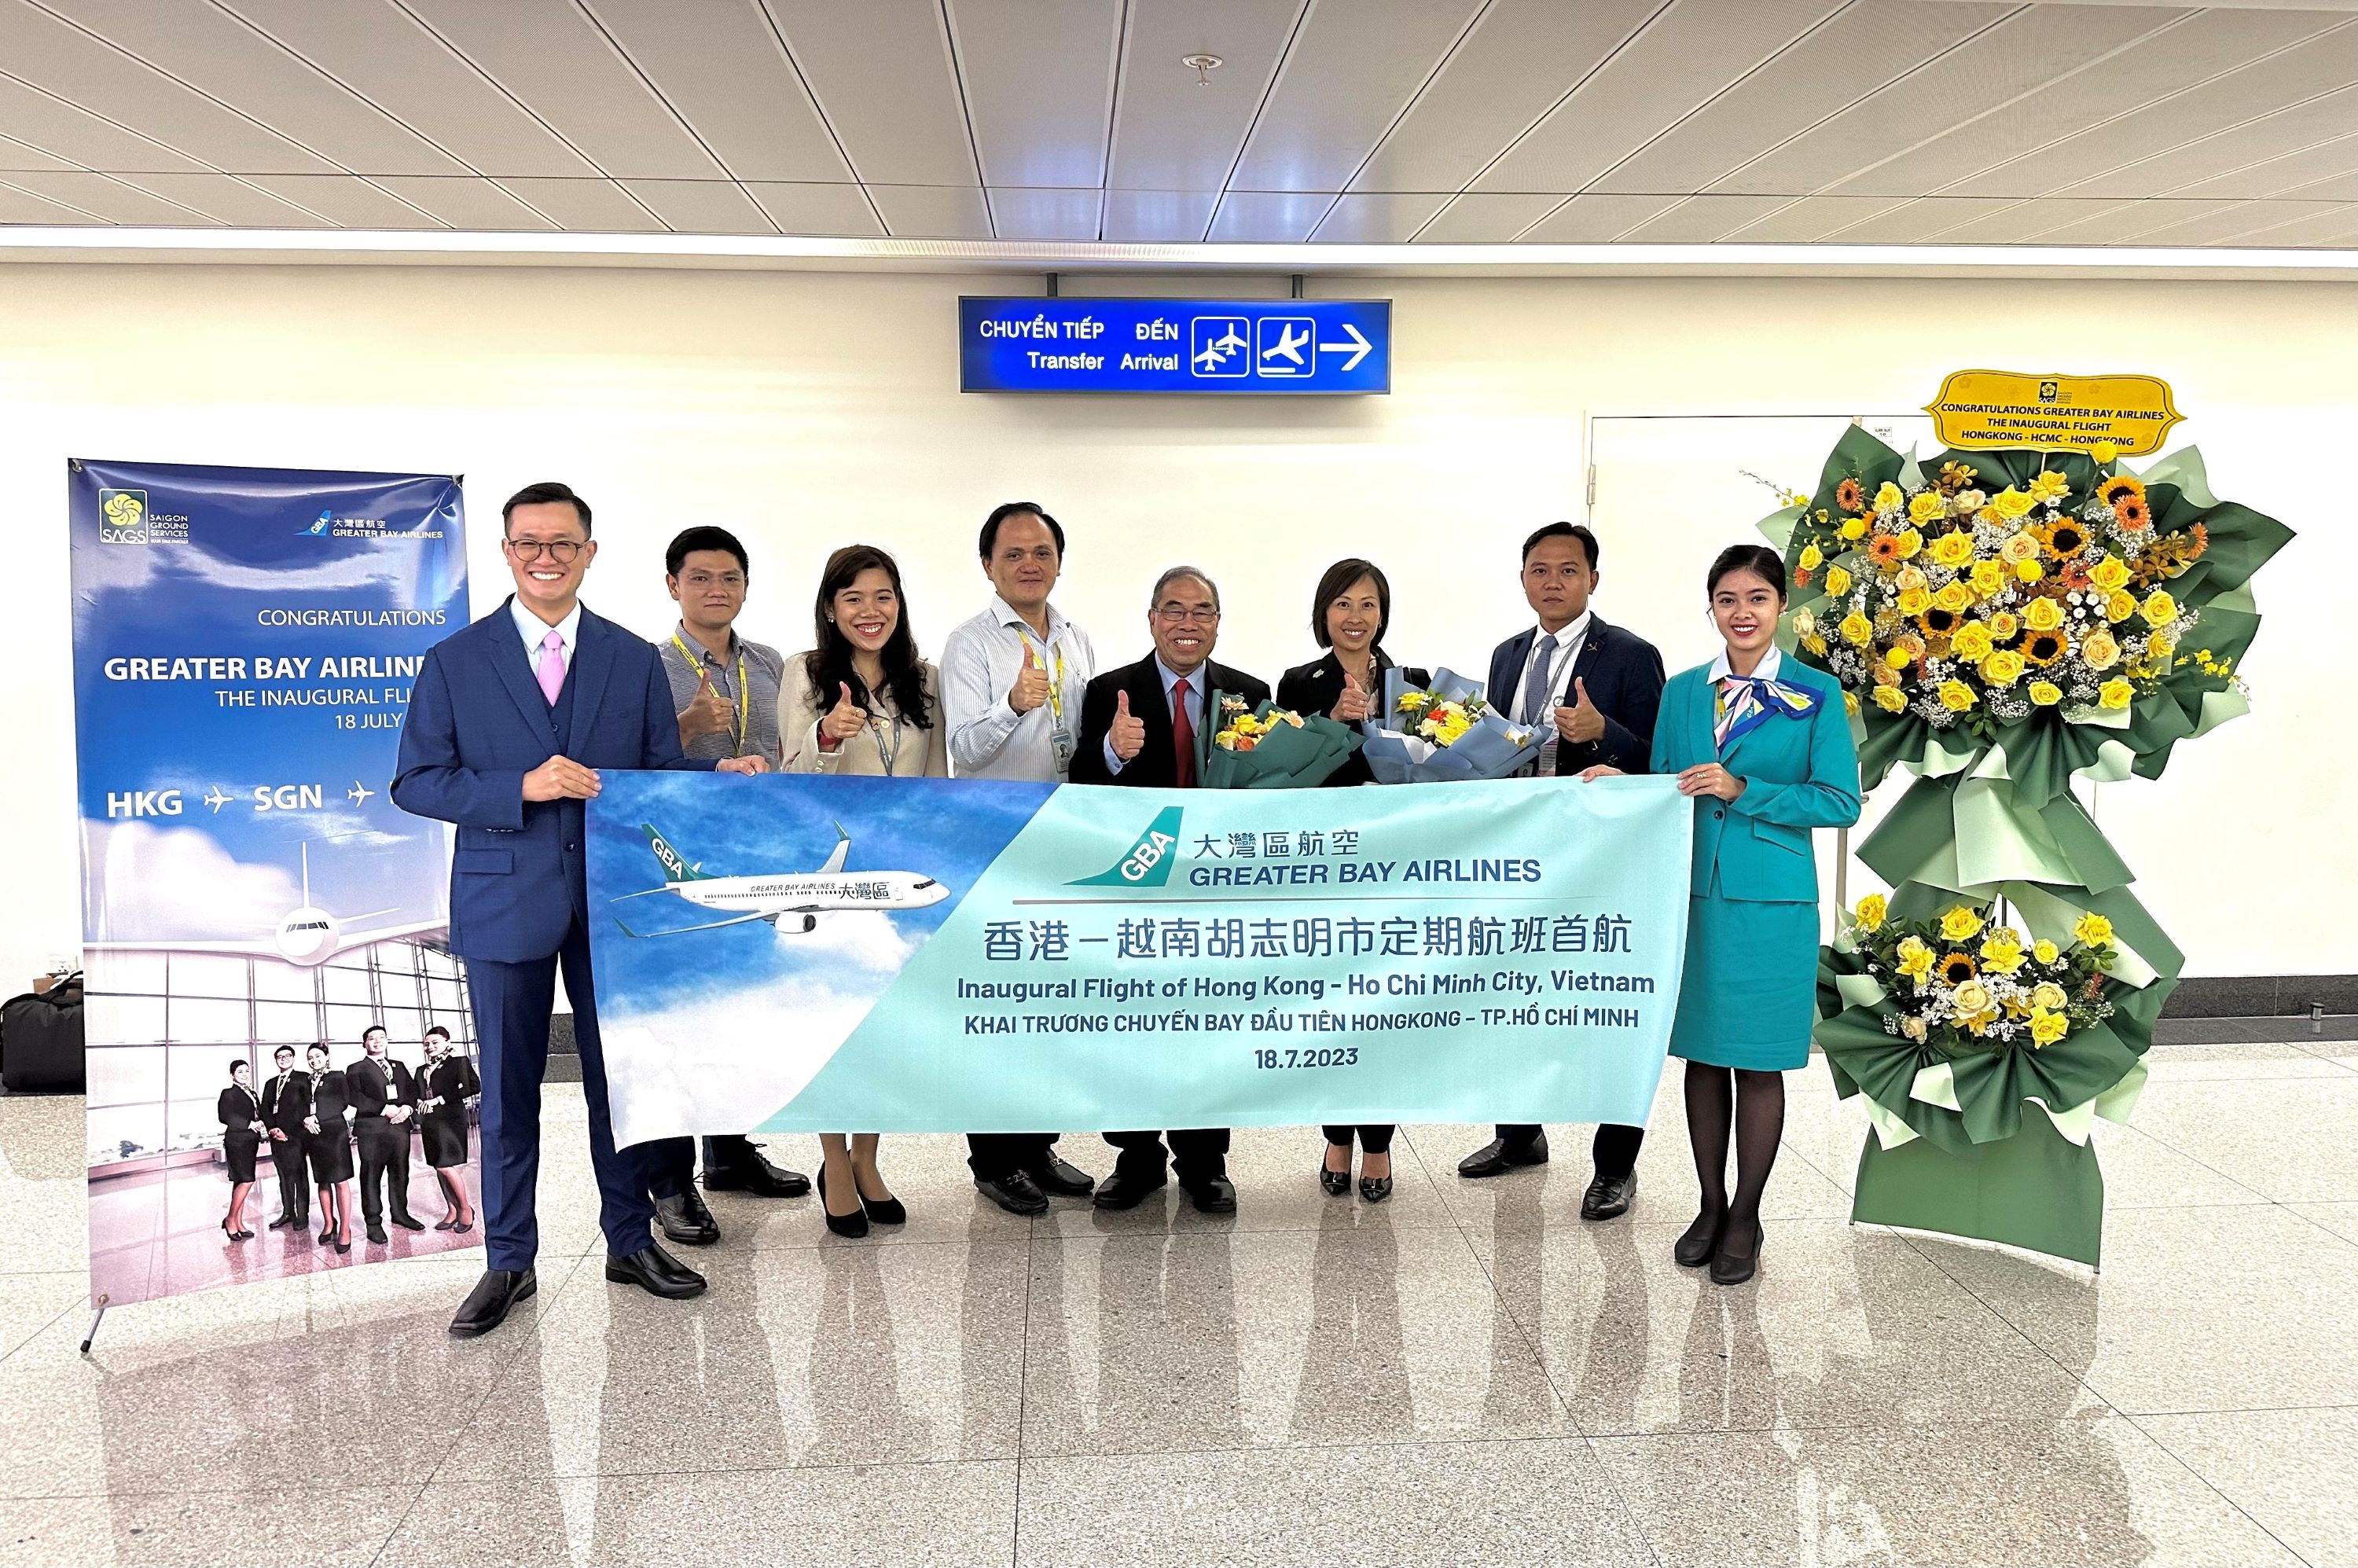 Greater Bay Airlines commences service to Ho Chi Minh City, Vietnam